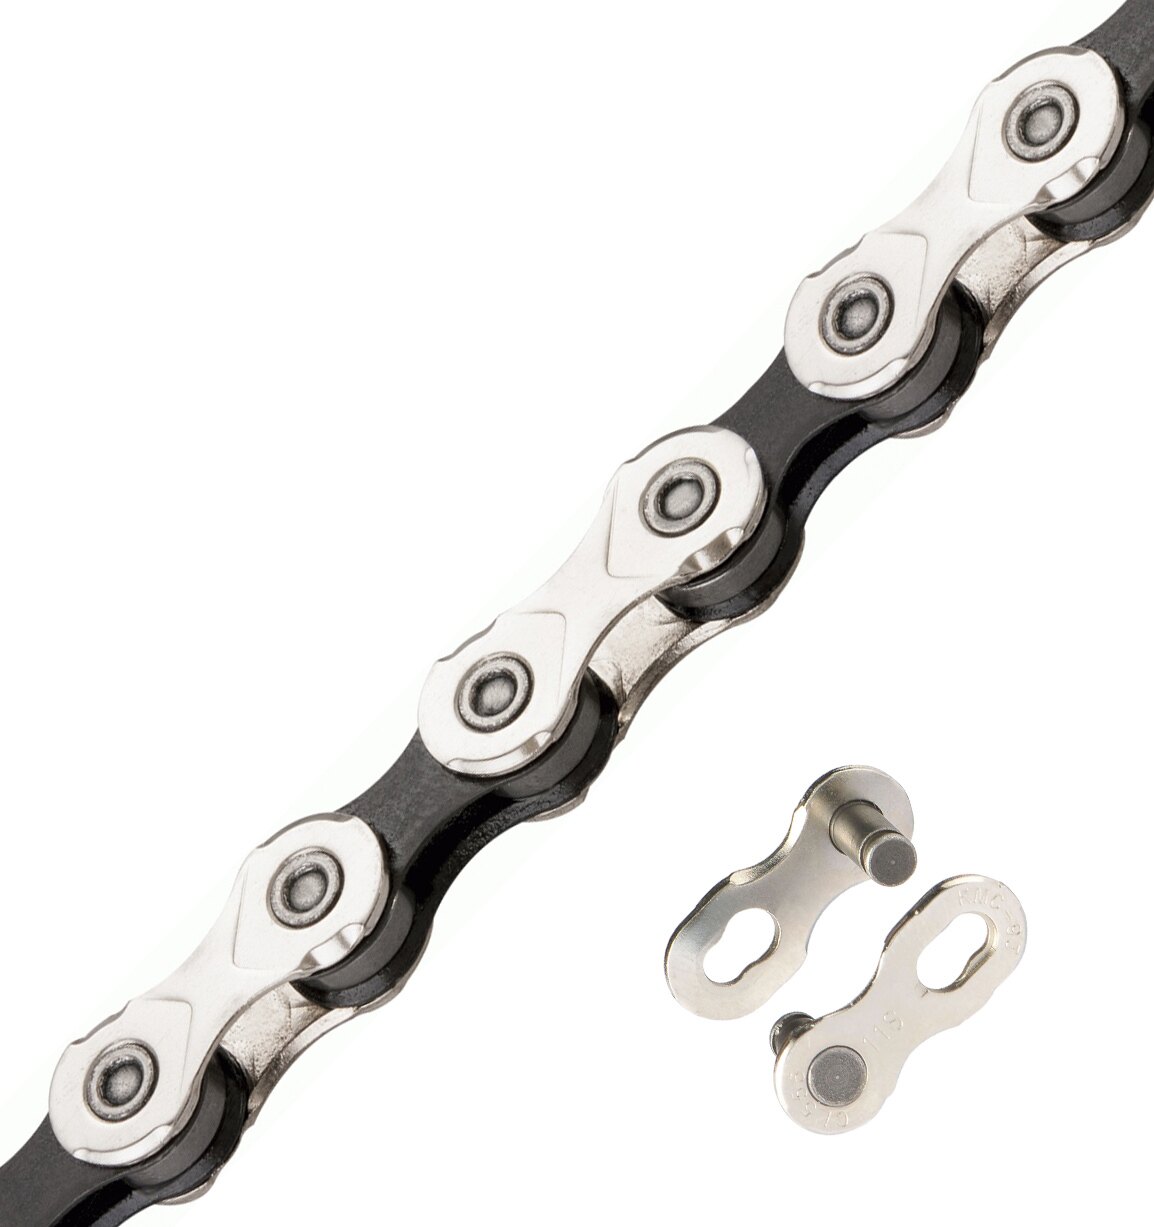 How to choose chains for your bike? Before